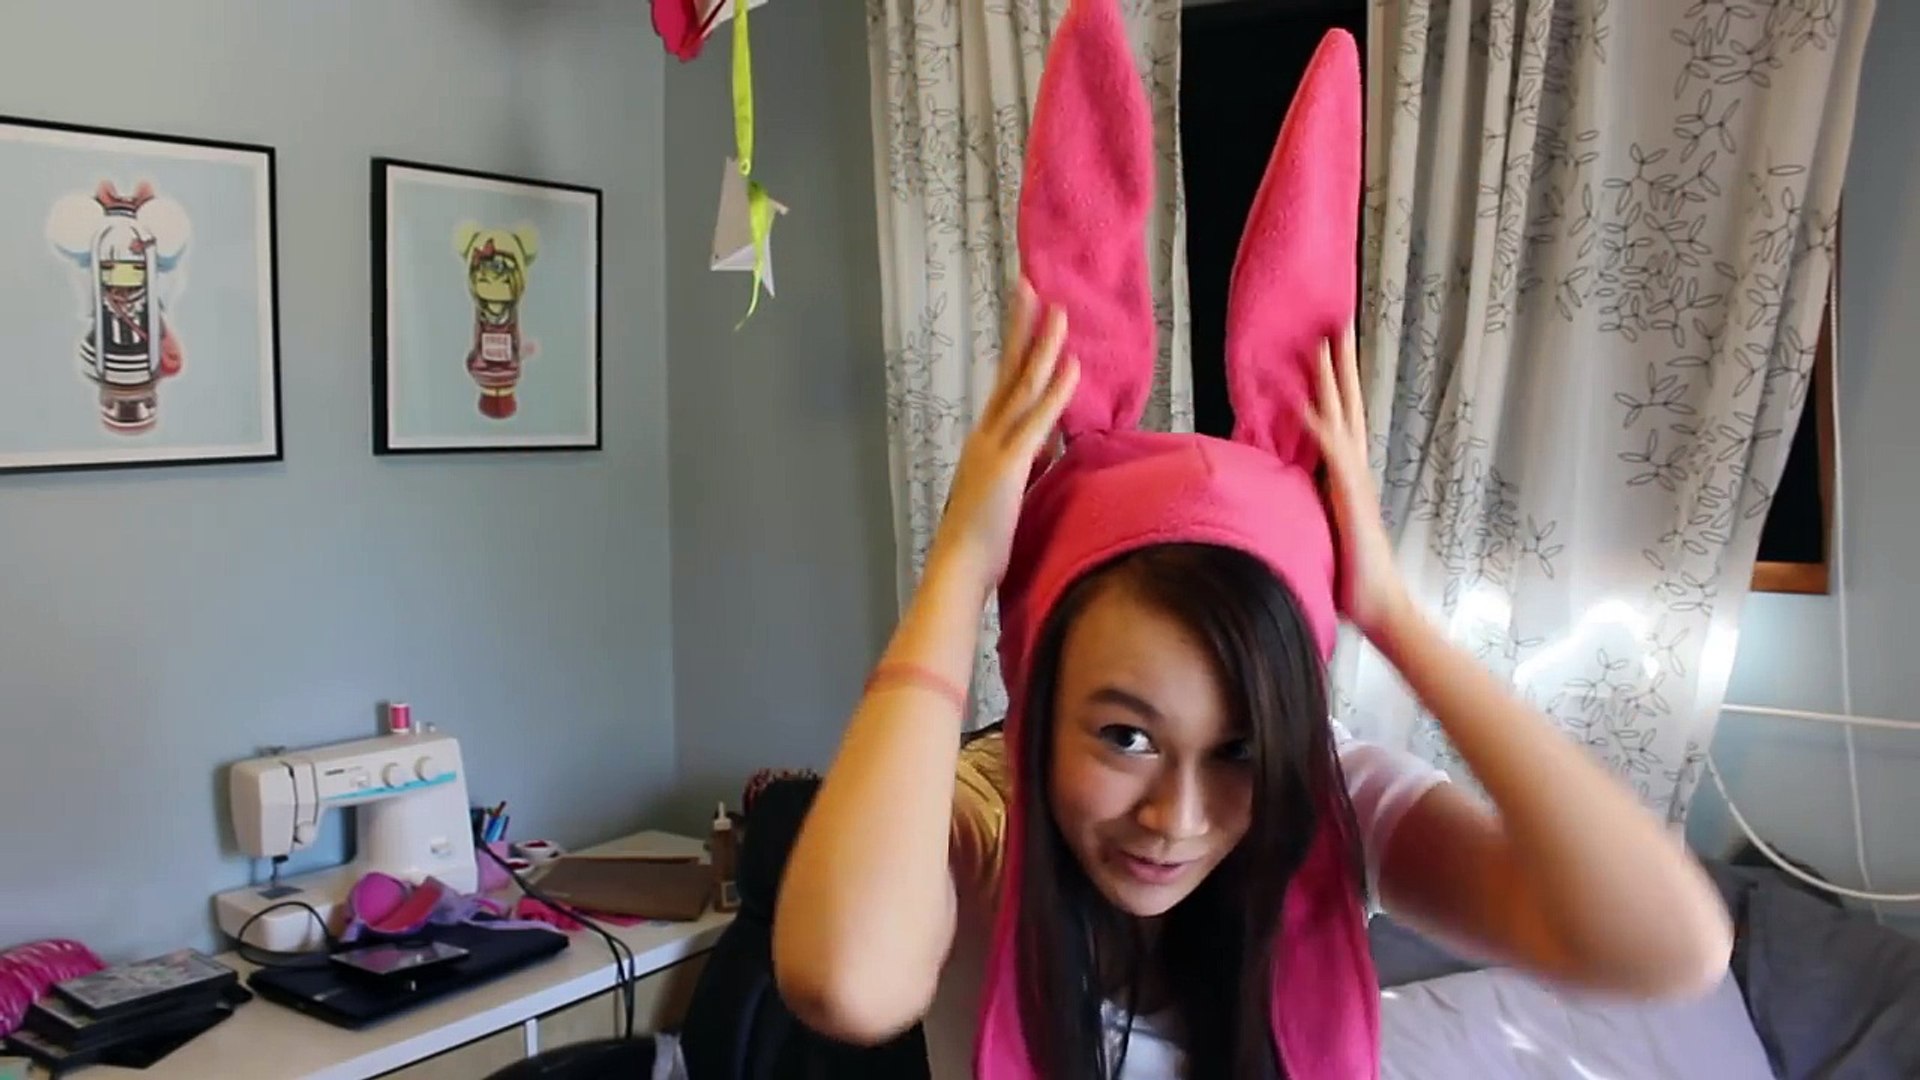 Sew a Louise Belcher / Bob's Burgers Hat  Diy bunny ears, Hat patterns to  sew, Bobs burgers